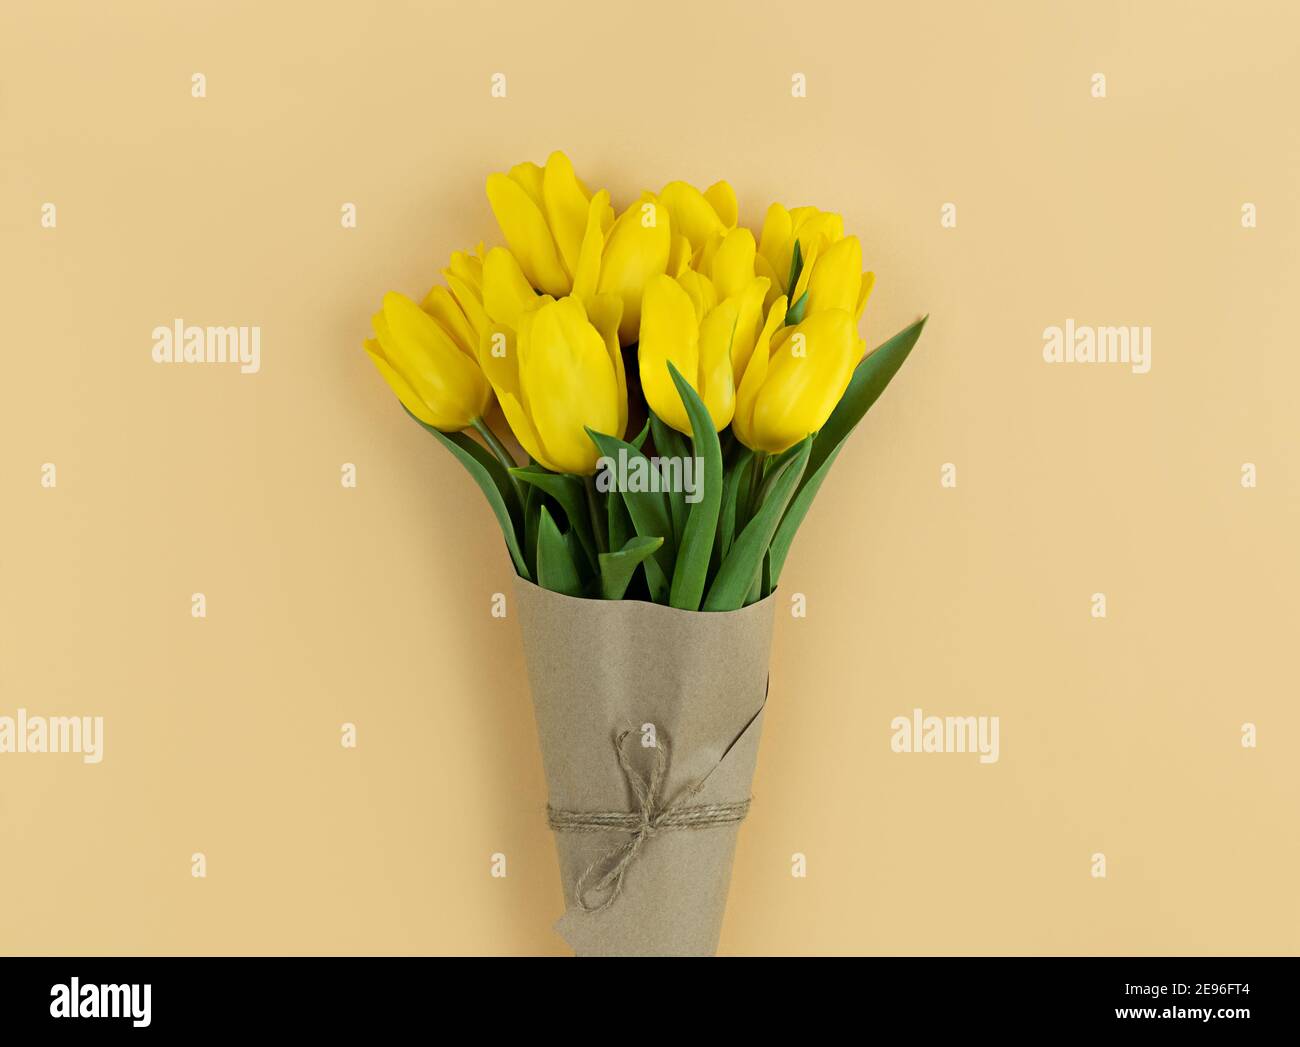 Bouquet of yellow tulips wrapped in craft paper on beige background. Stock Photo